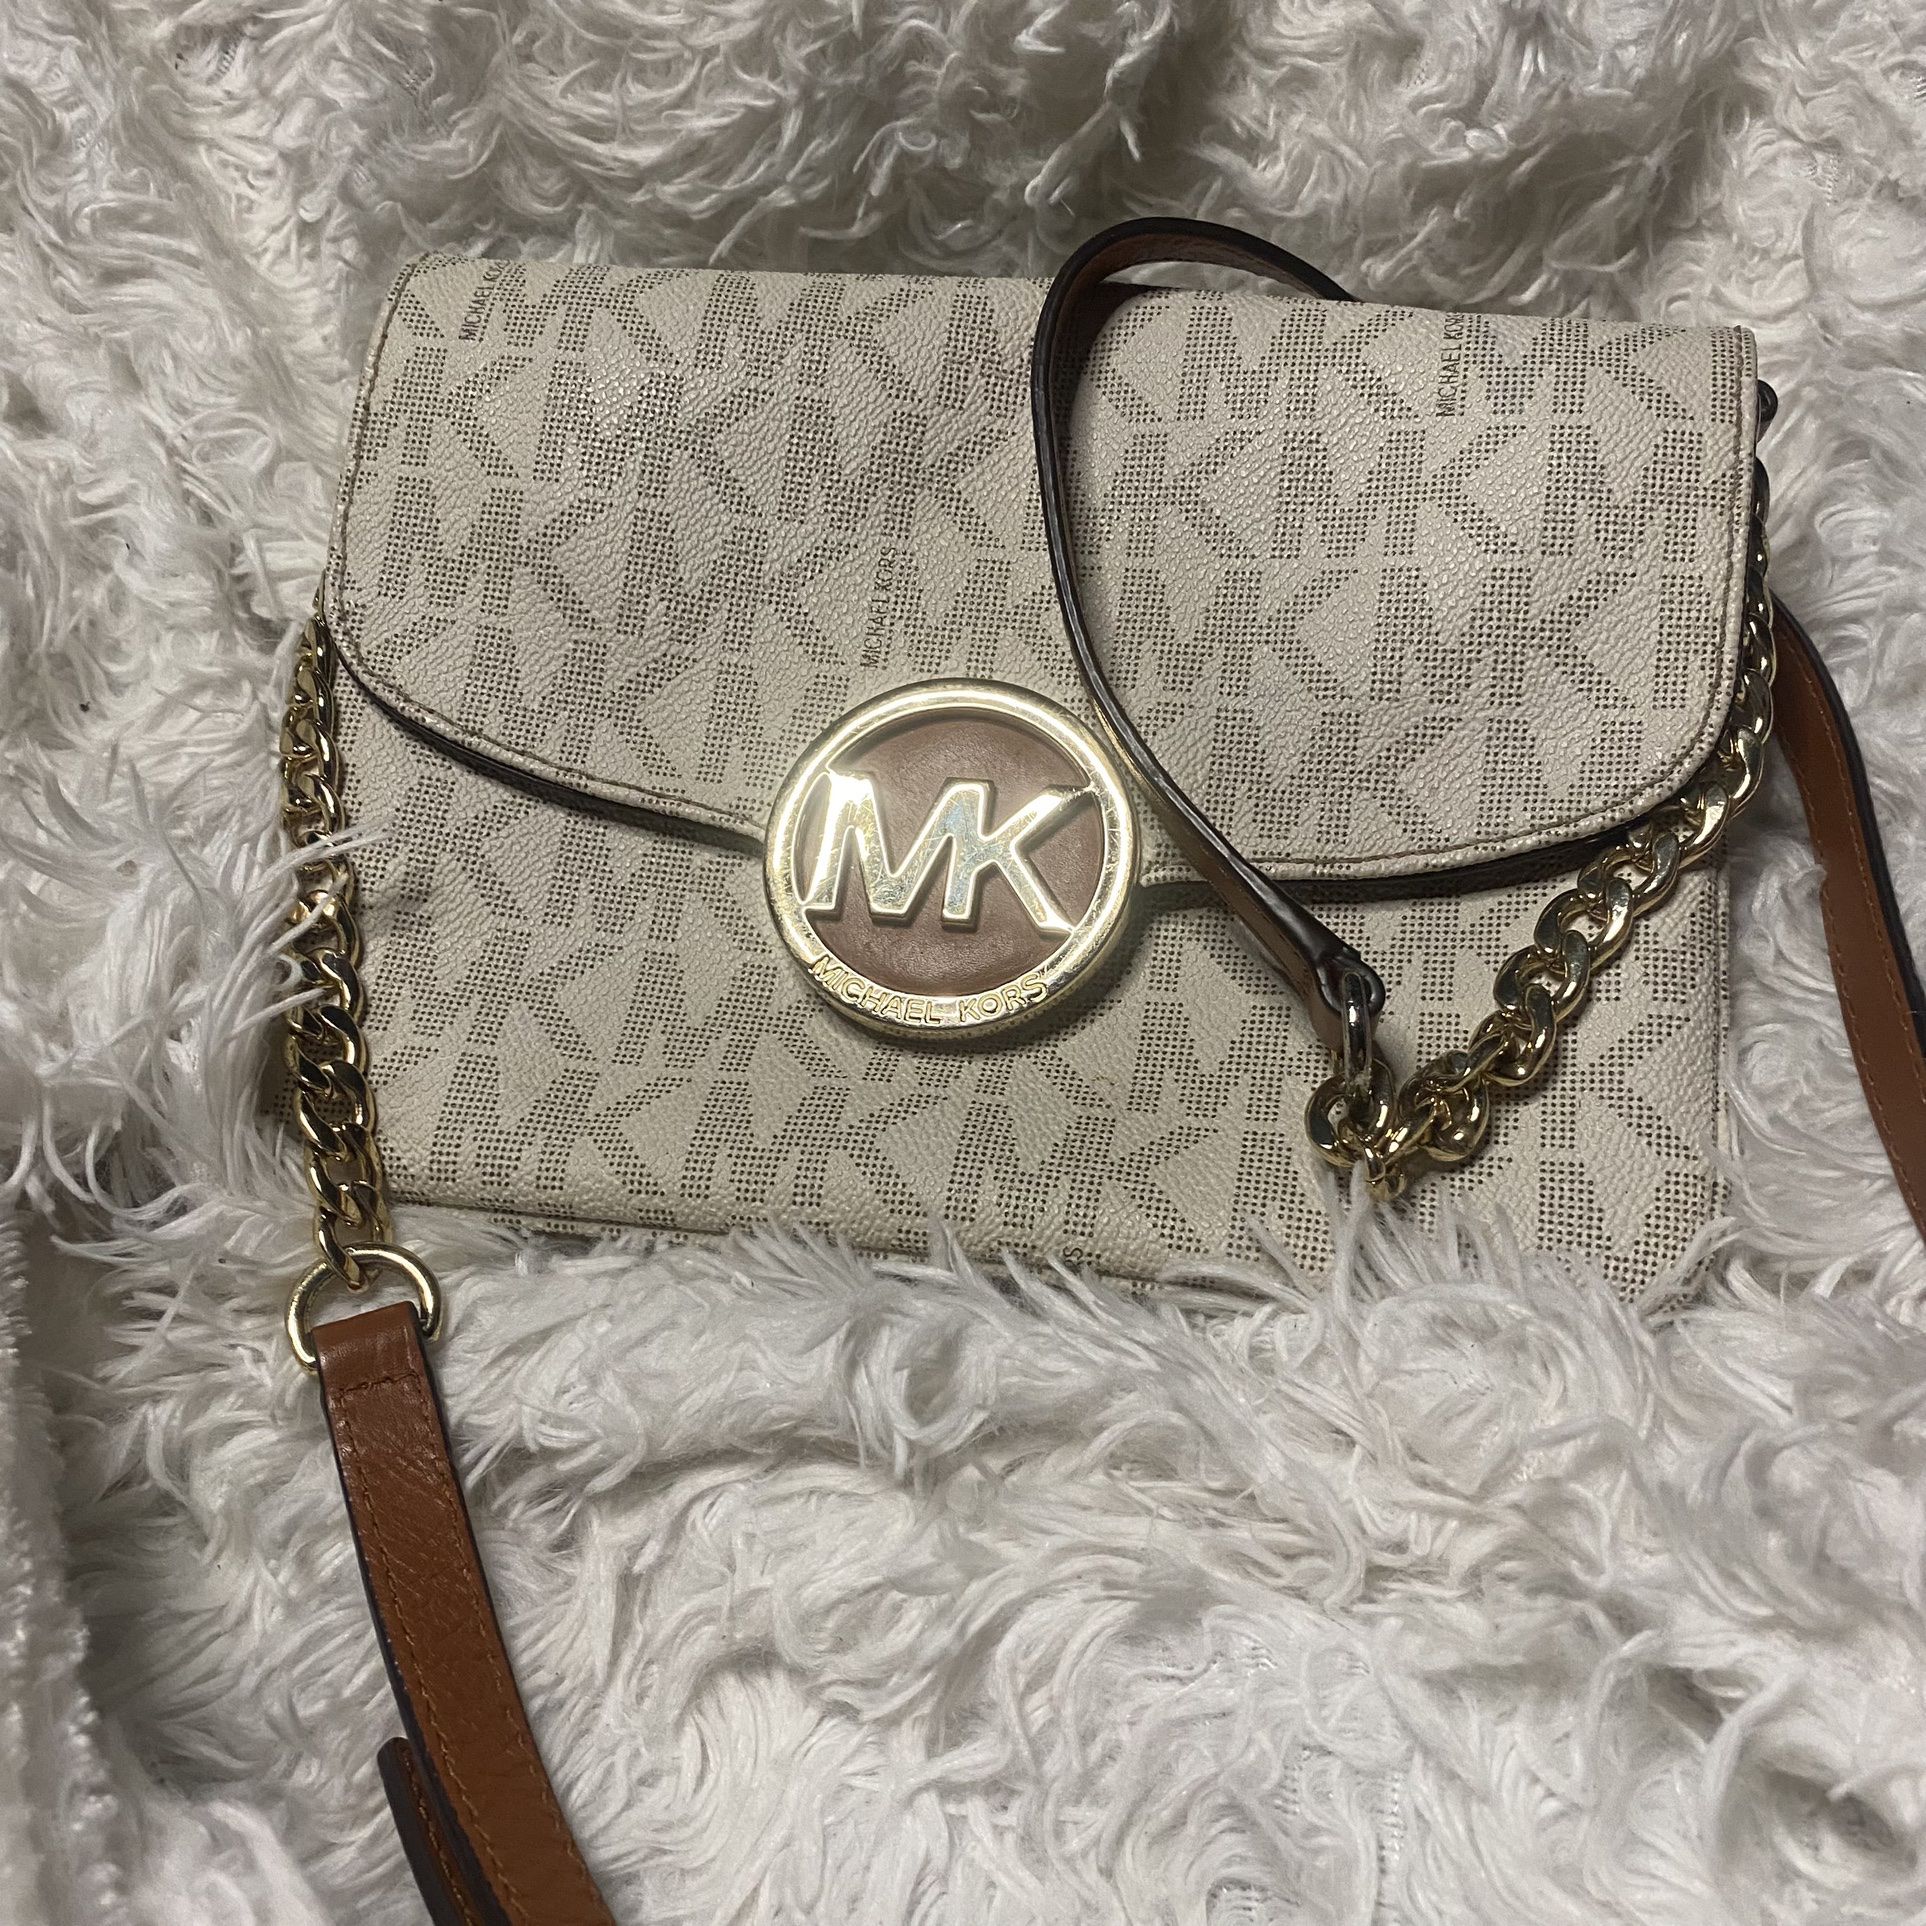 Price Drop! Like New Authentic Michael Kors Crossbody Bag for